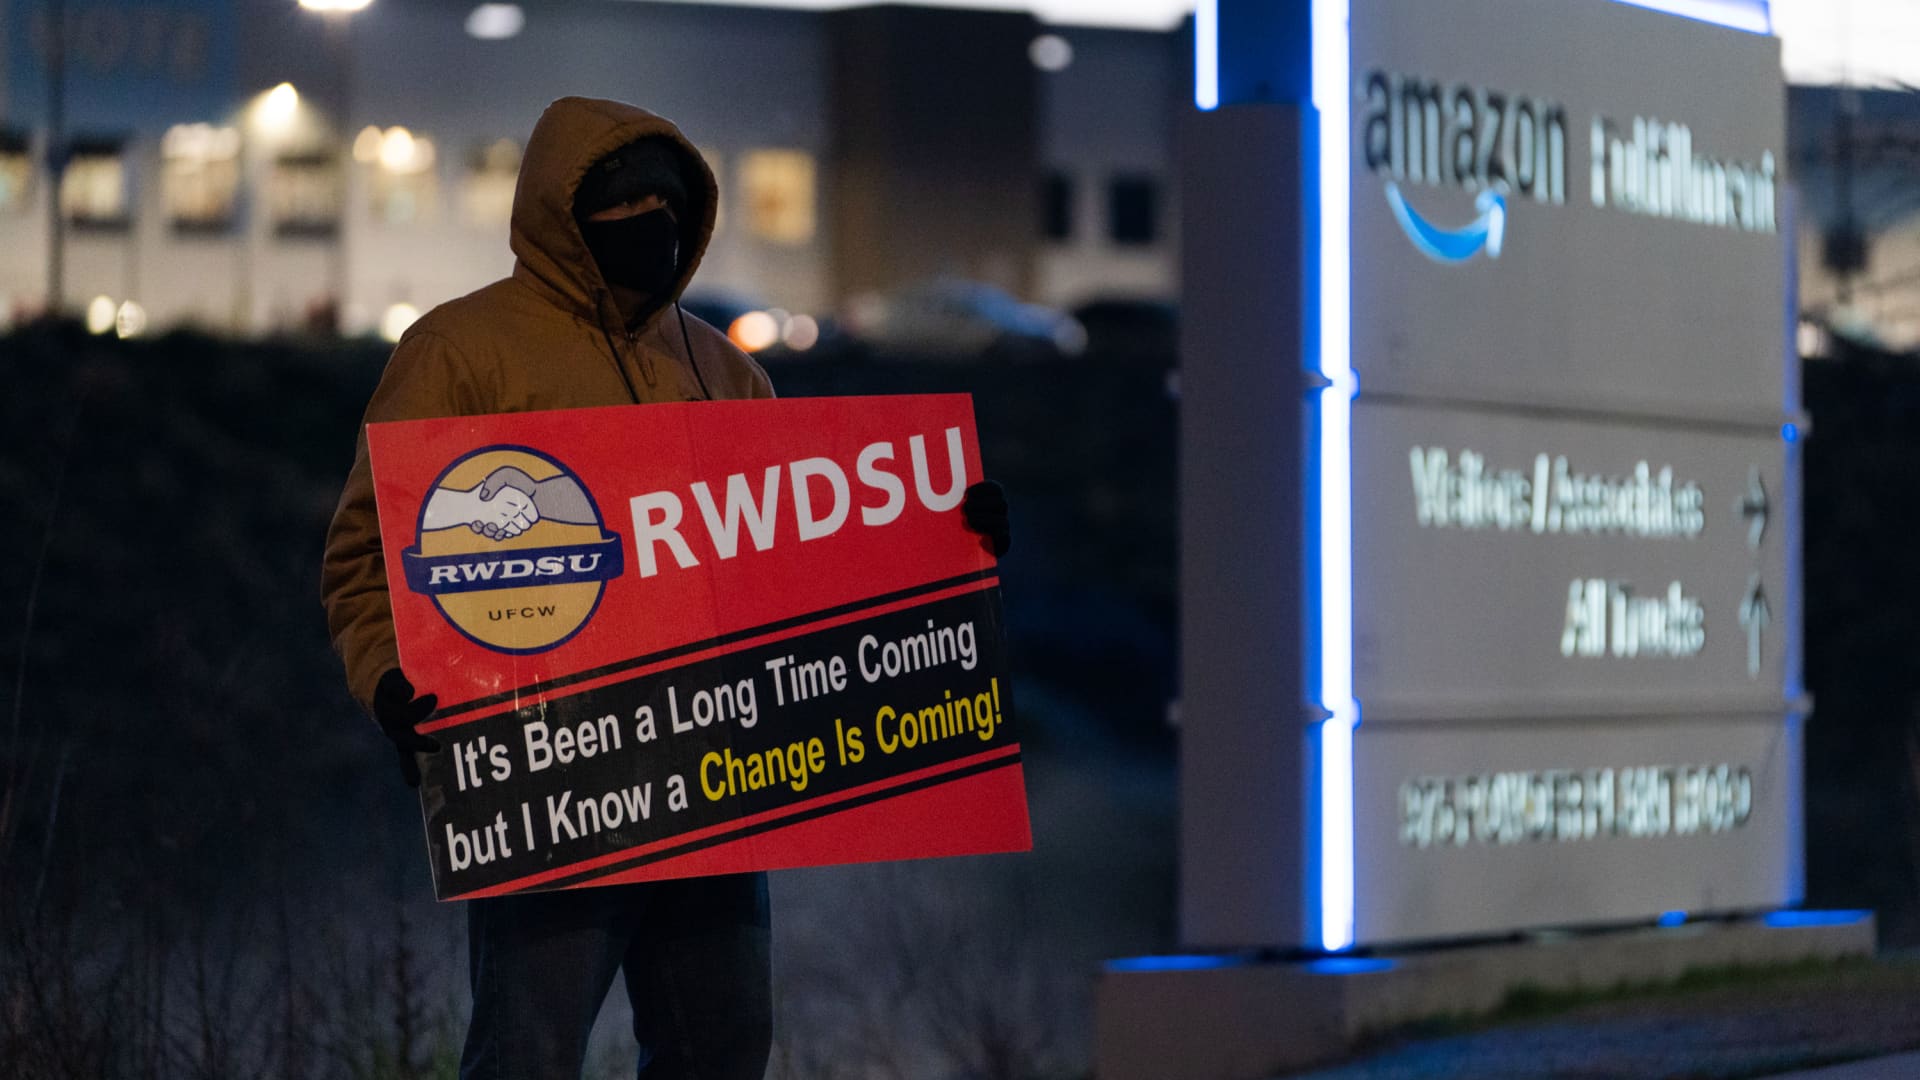 An RWDSU union rep holds a sign outside the Amazon fulfillment warehouse at the center of a unionization drive on March 29, 2021 in Bessemer, Alabama.